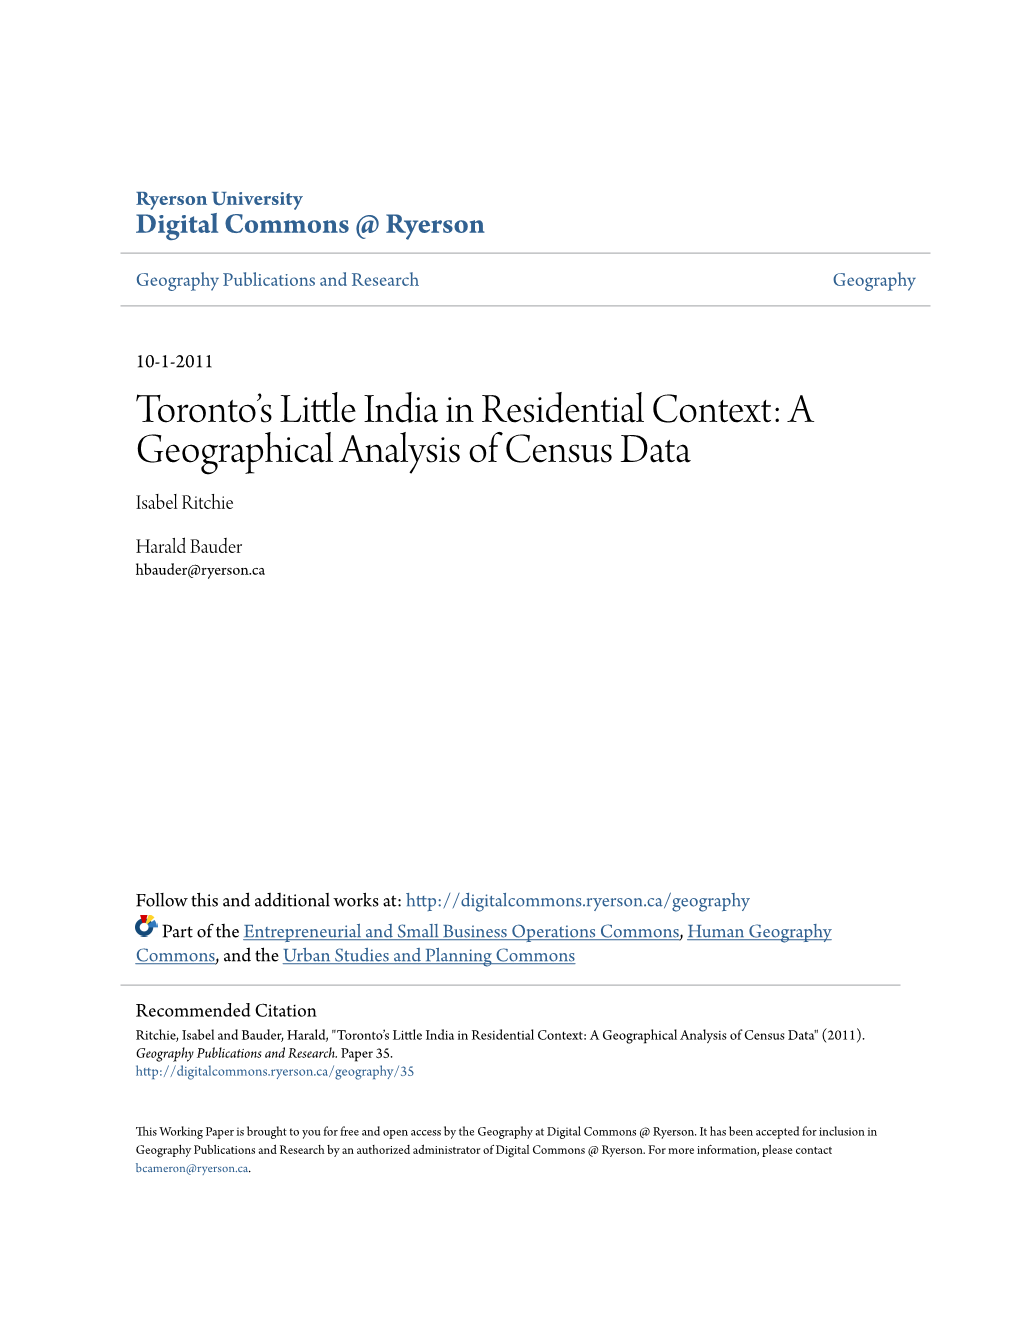 A Geographical Analysis of Census Data Isabel Ritchie